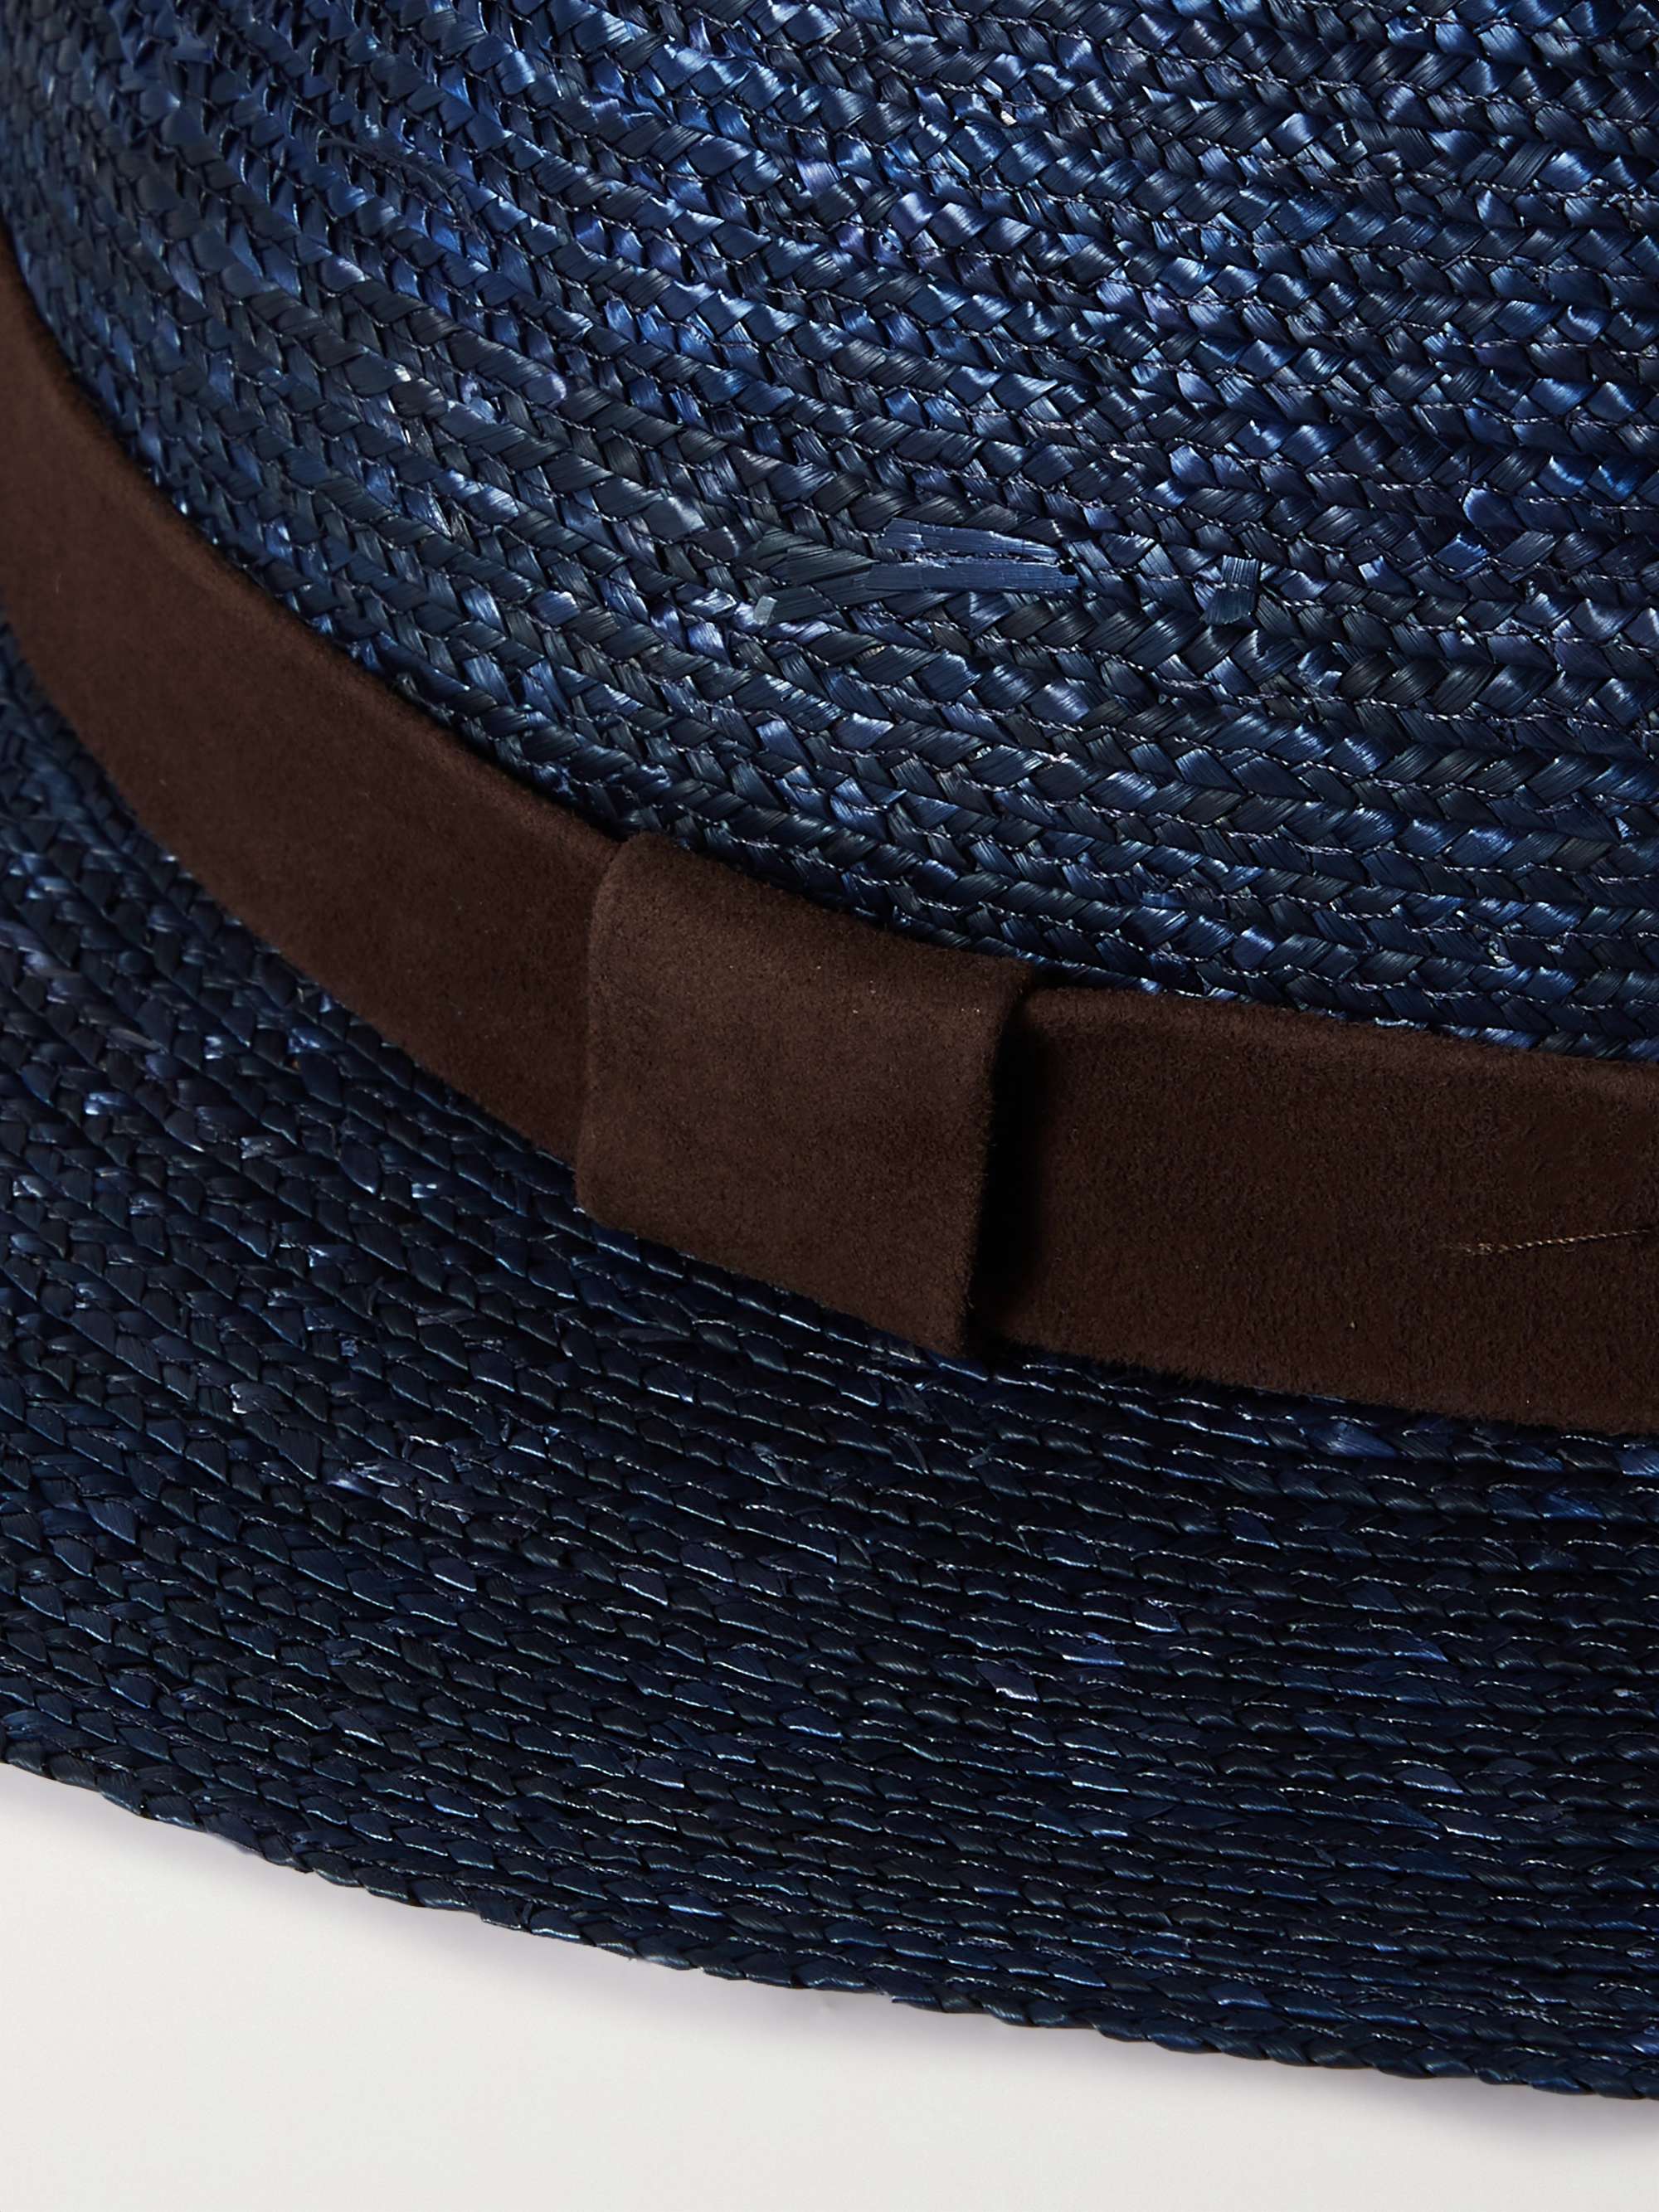 LOCK & CO HATTERS Suede-Trimmed Straw Panama Hat